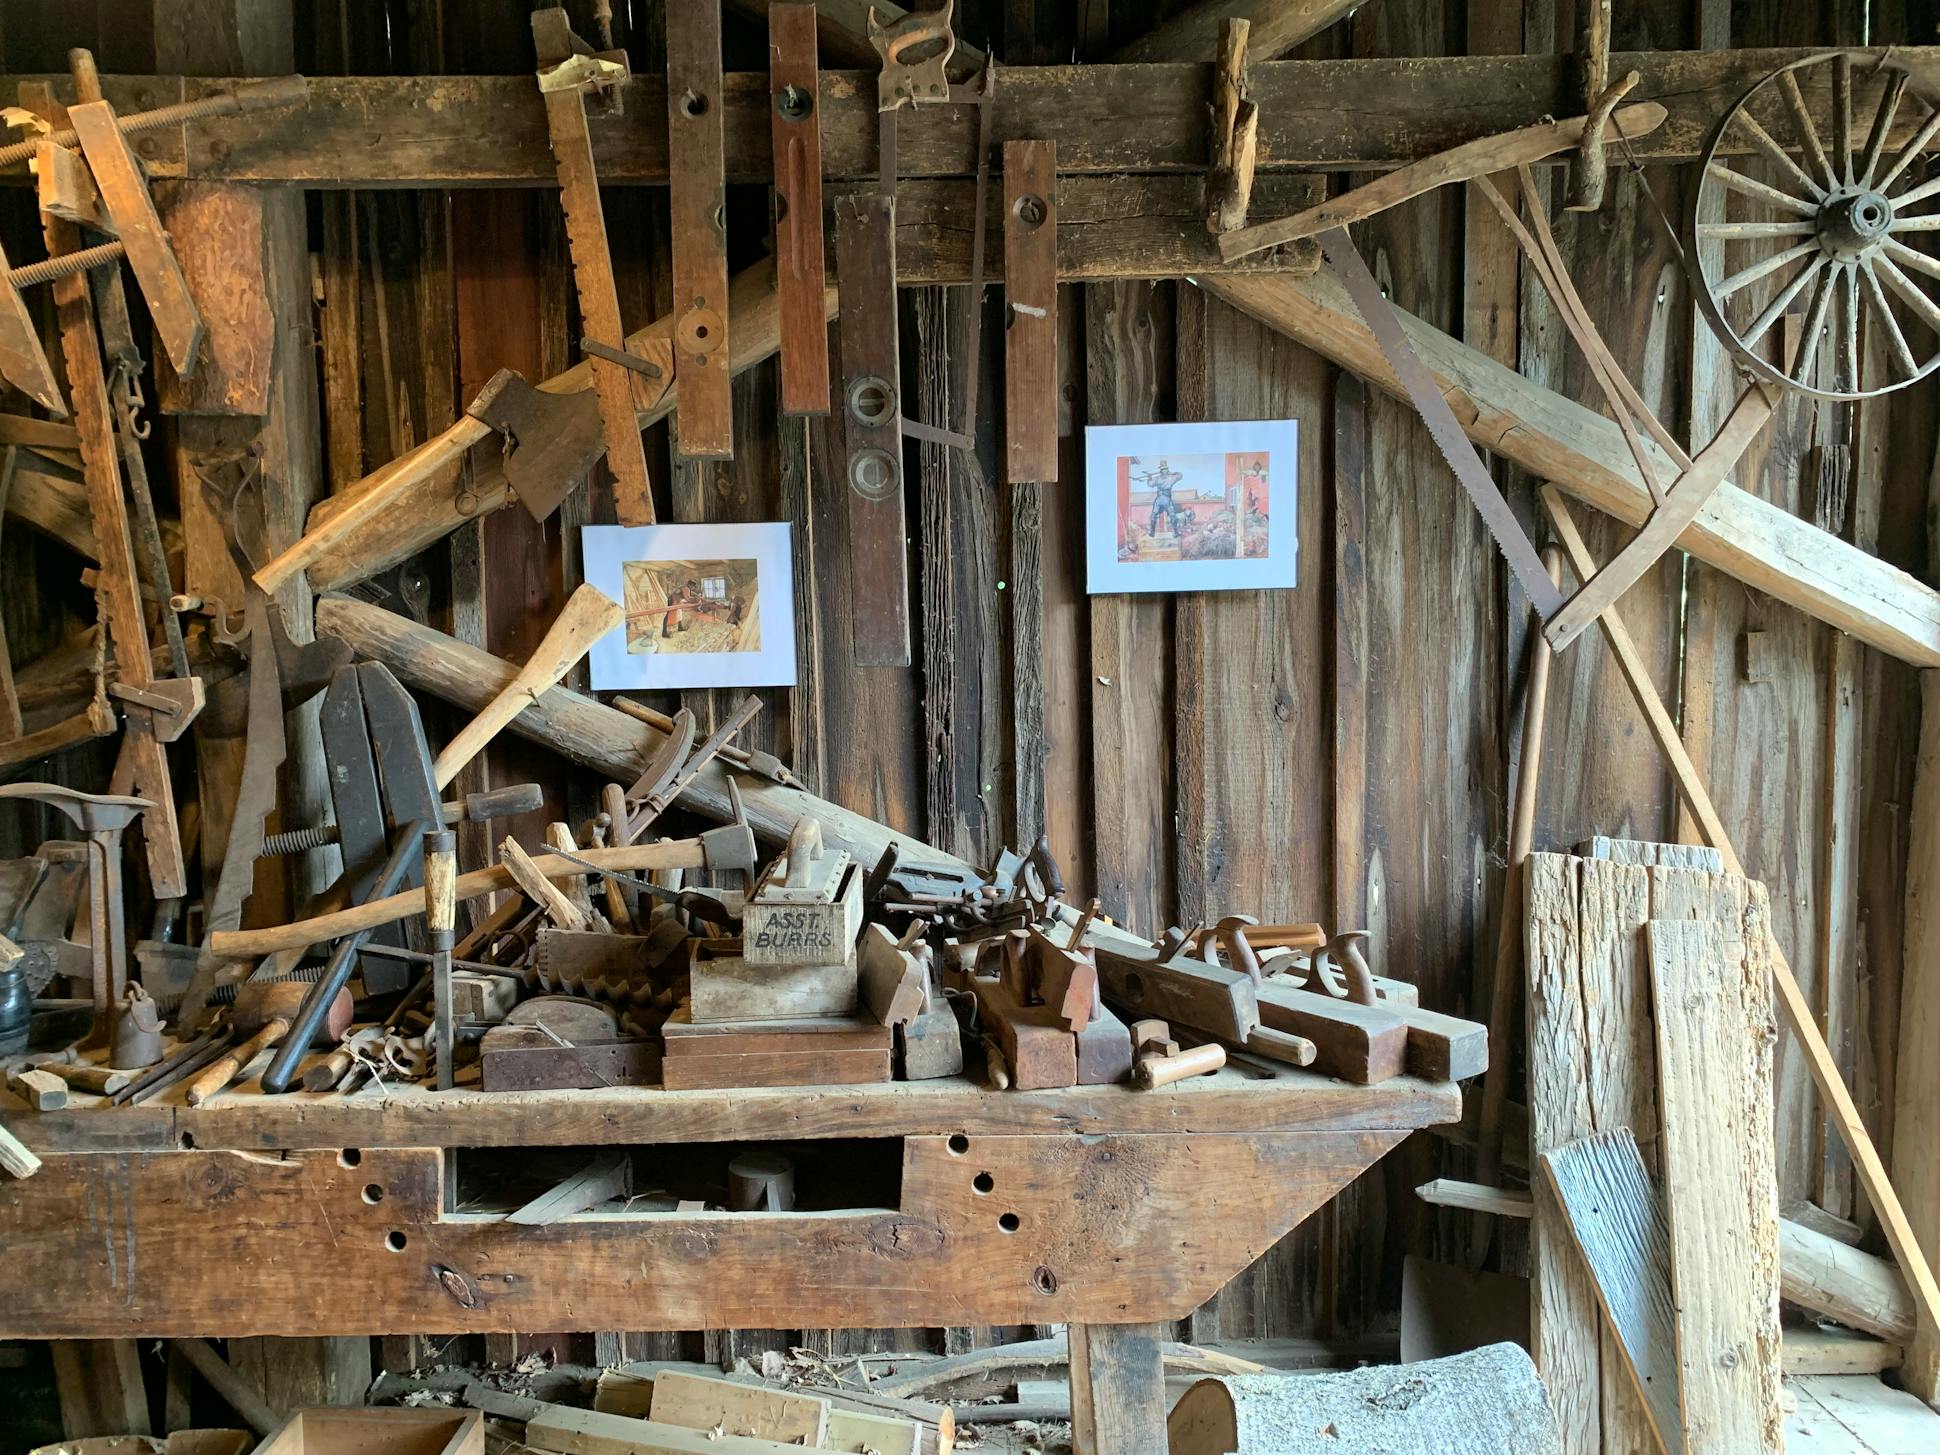 The Gammelgården (old farm) museum includes several buildings from the state's first Swedish settlement, including this tool-filled barn.